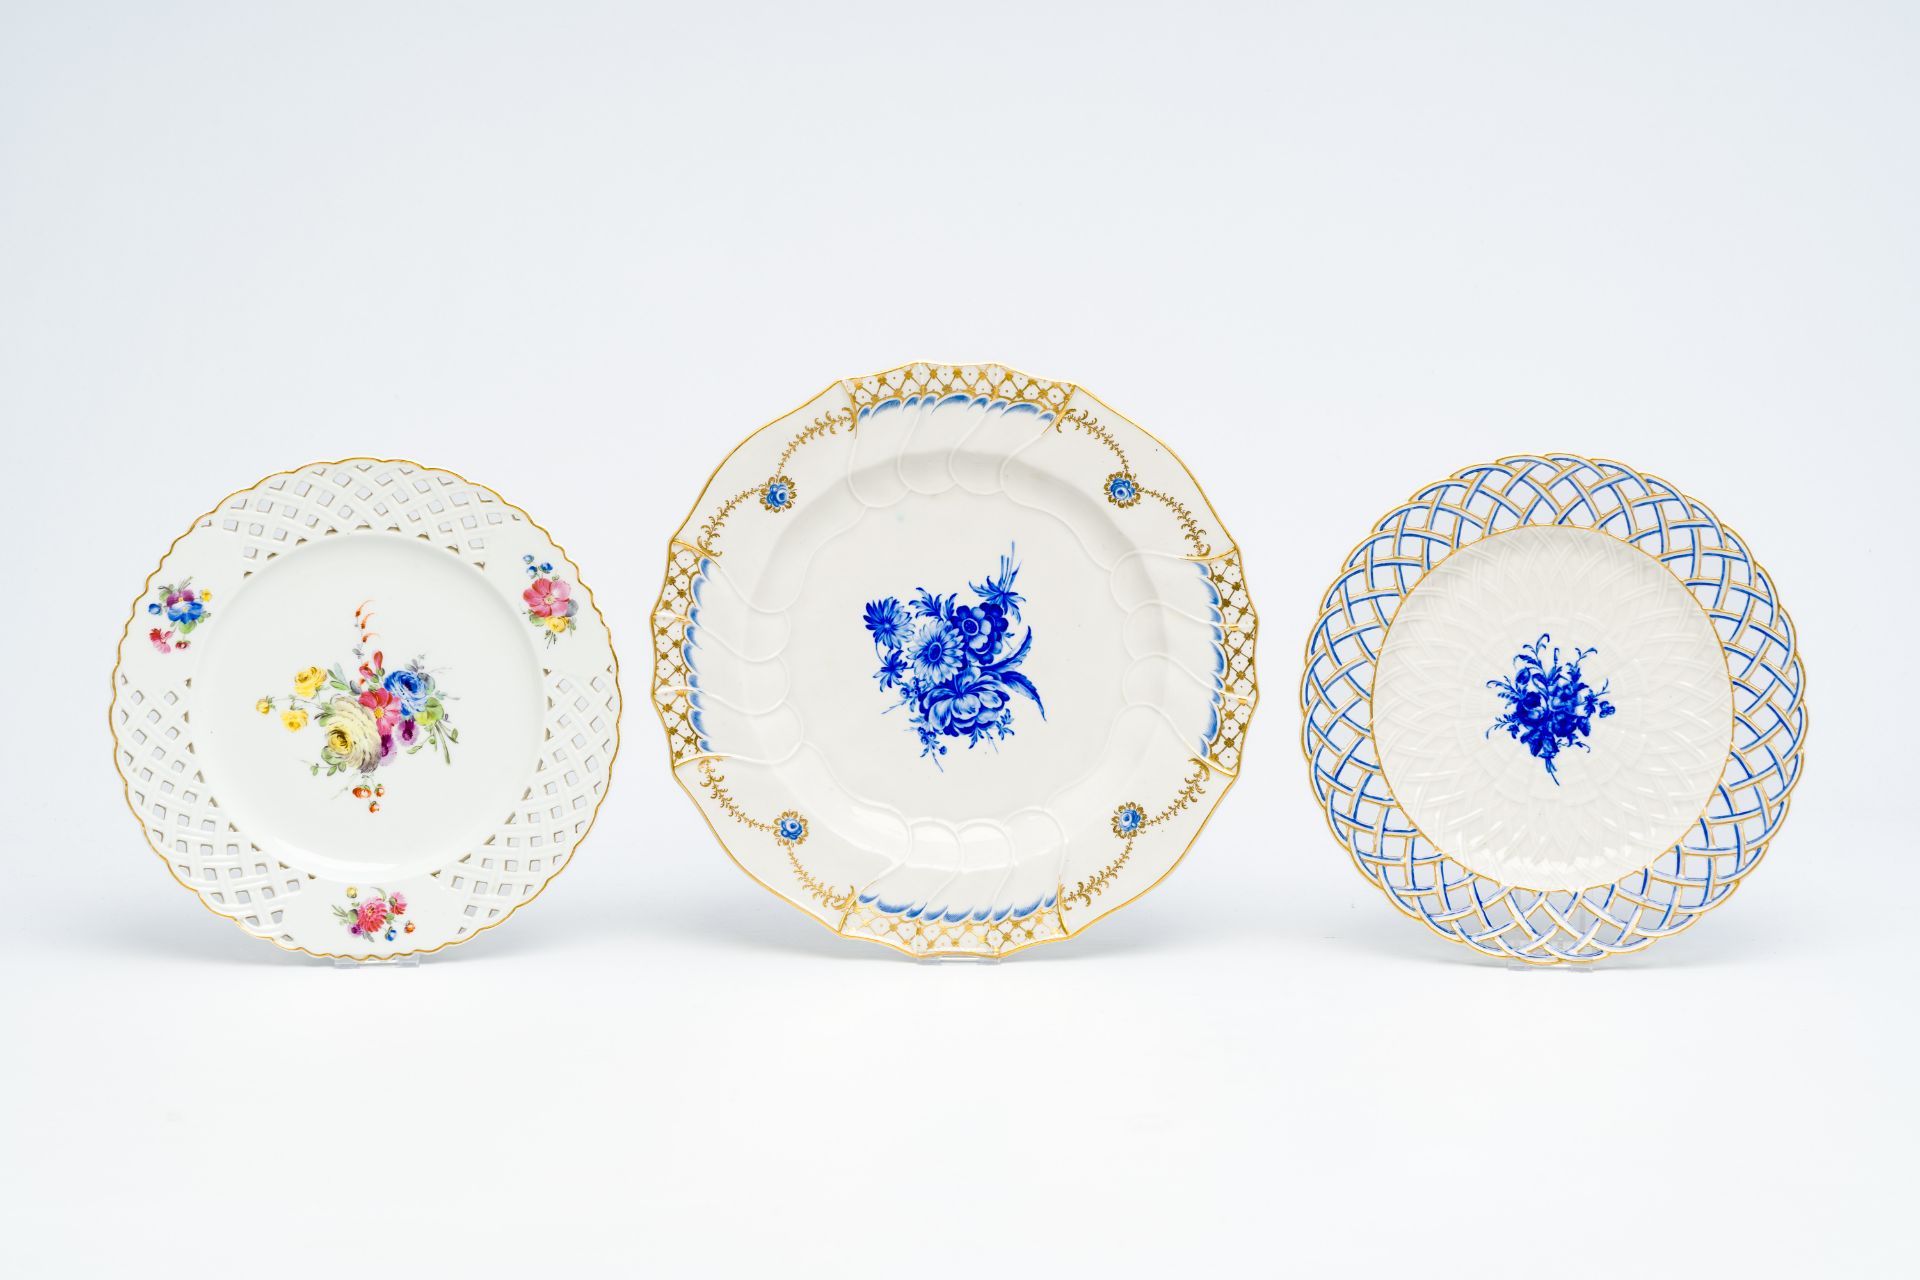 Three polychrome porcelain plates with floral design, Tournai and The Hague, 18th C. - Image 2 of 3